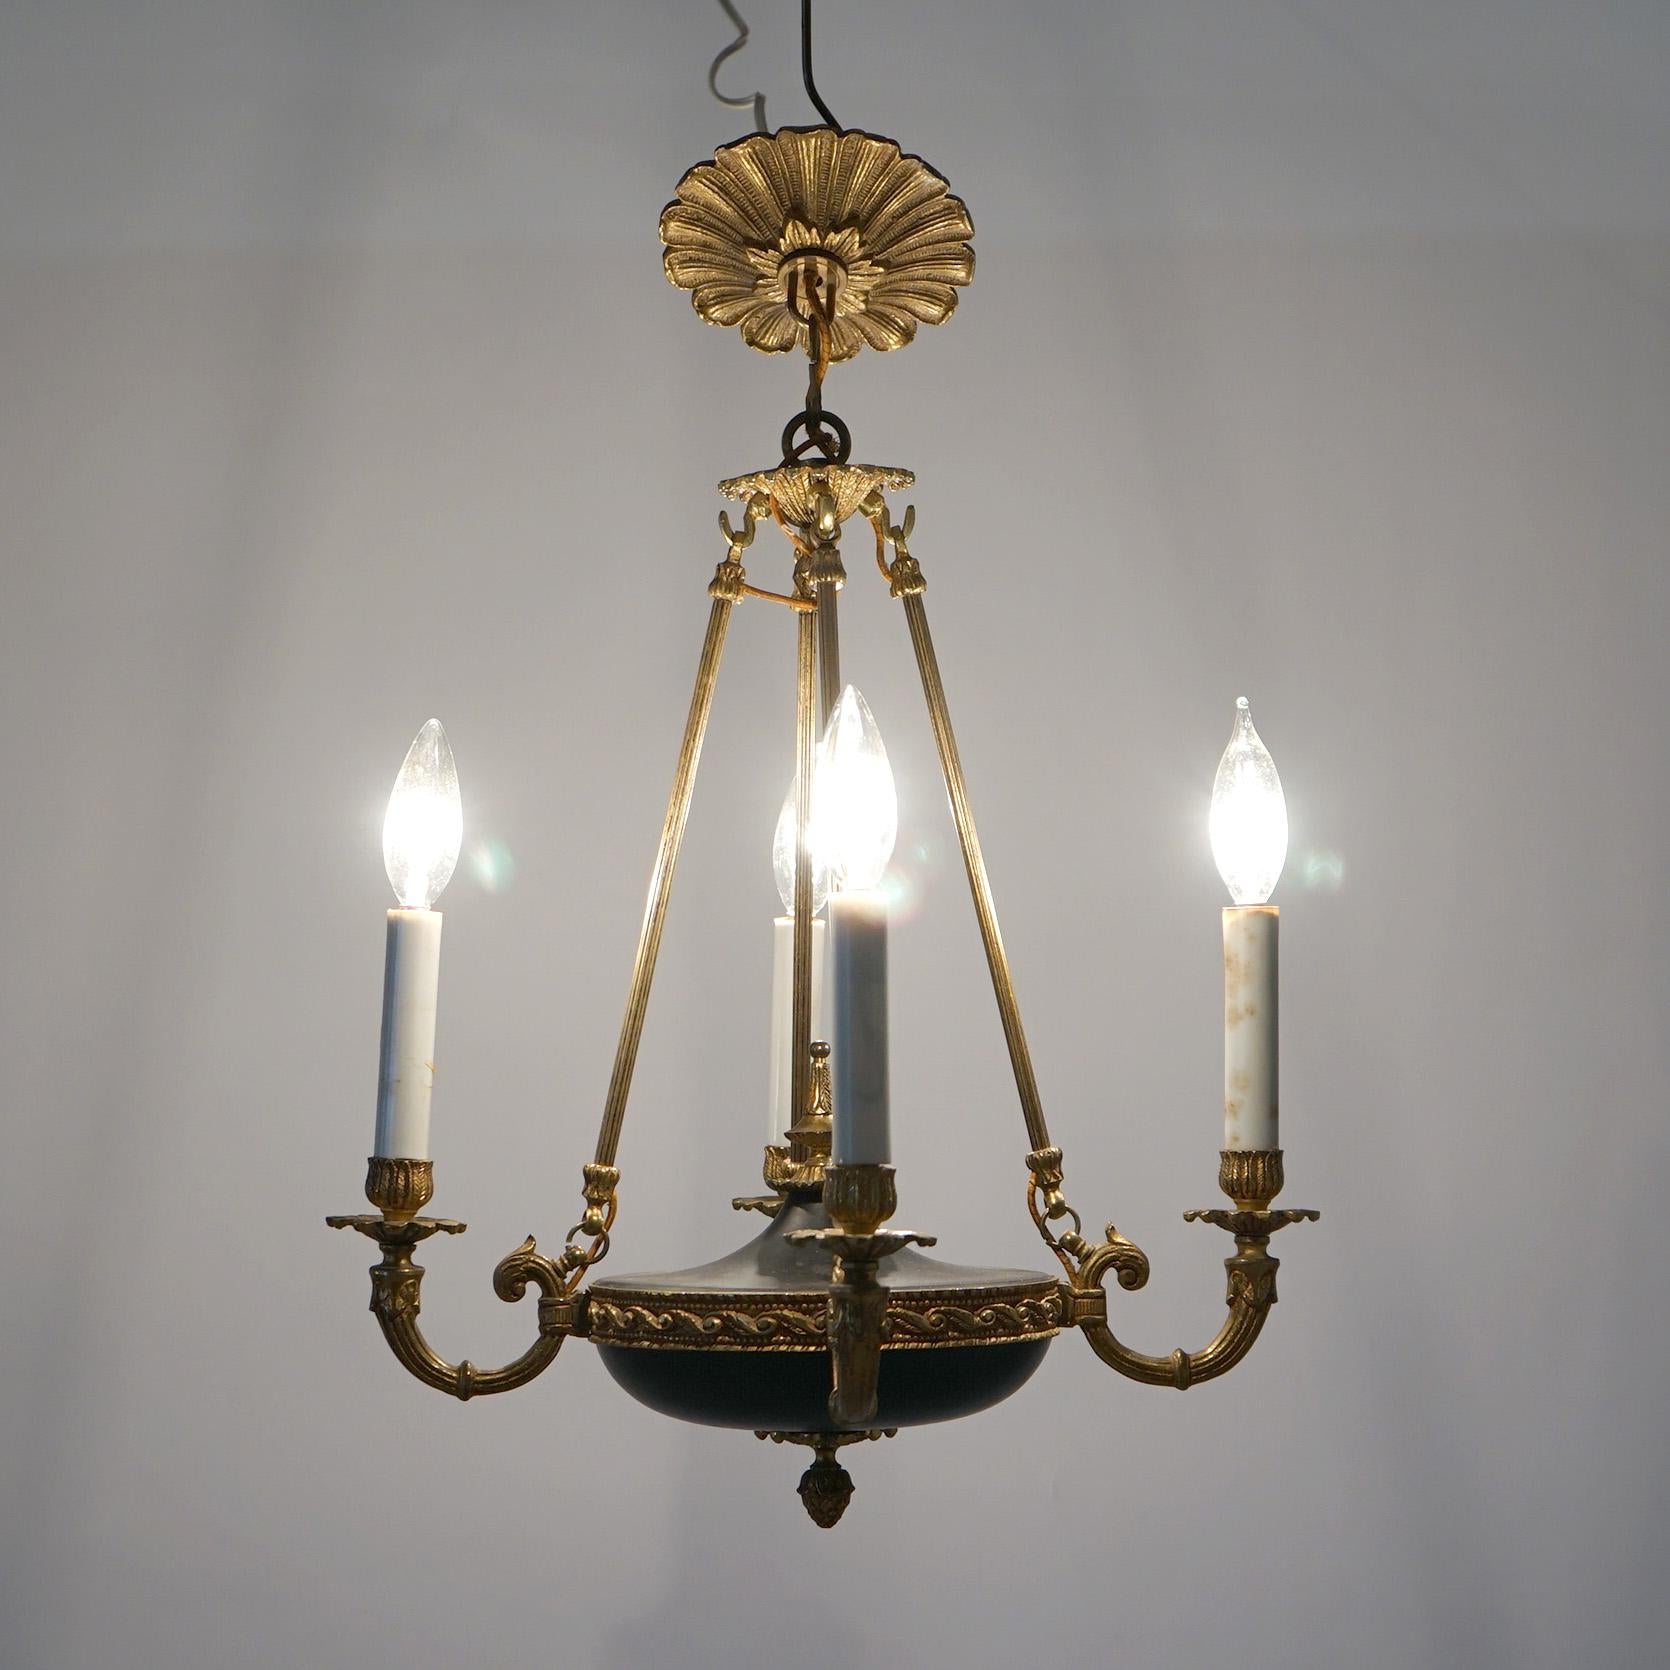 French Empire Four-Light Pan Chandelier with Gilt Metal Frame having Drop Bars, Scroll Foliate Form Arms and Embossed Mounts over an Ebonized Urn Form Font, 20th century

Measures- 22.5''H x 15.5''W x 15.5''D